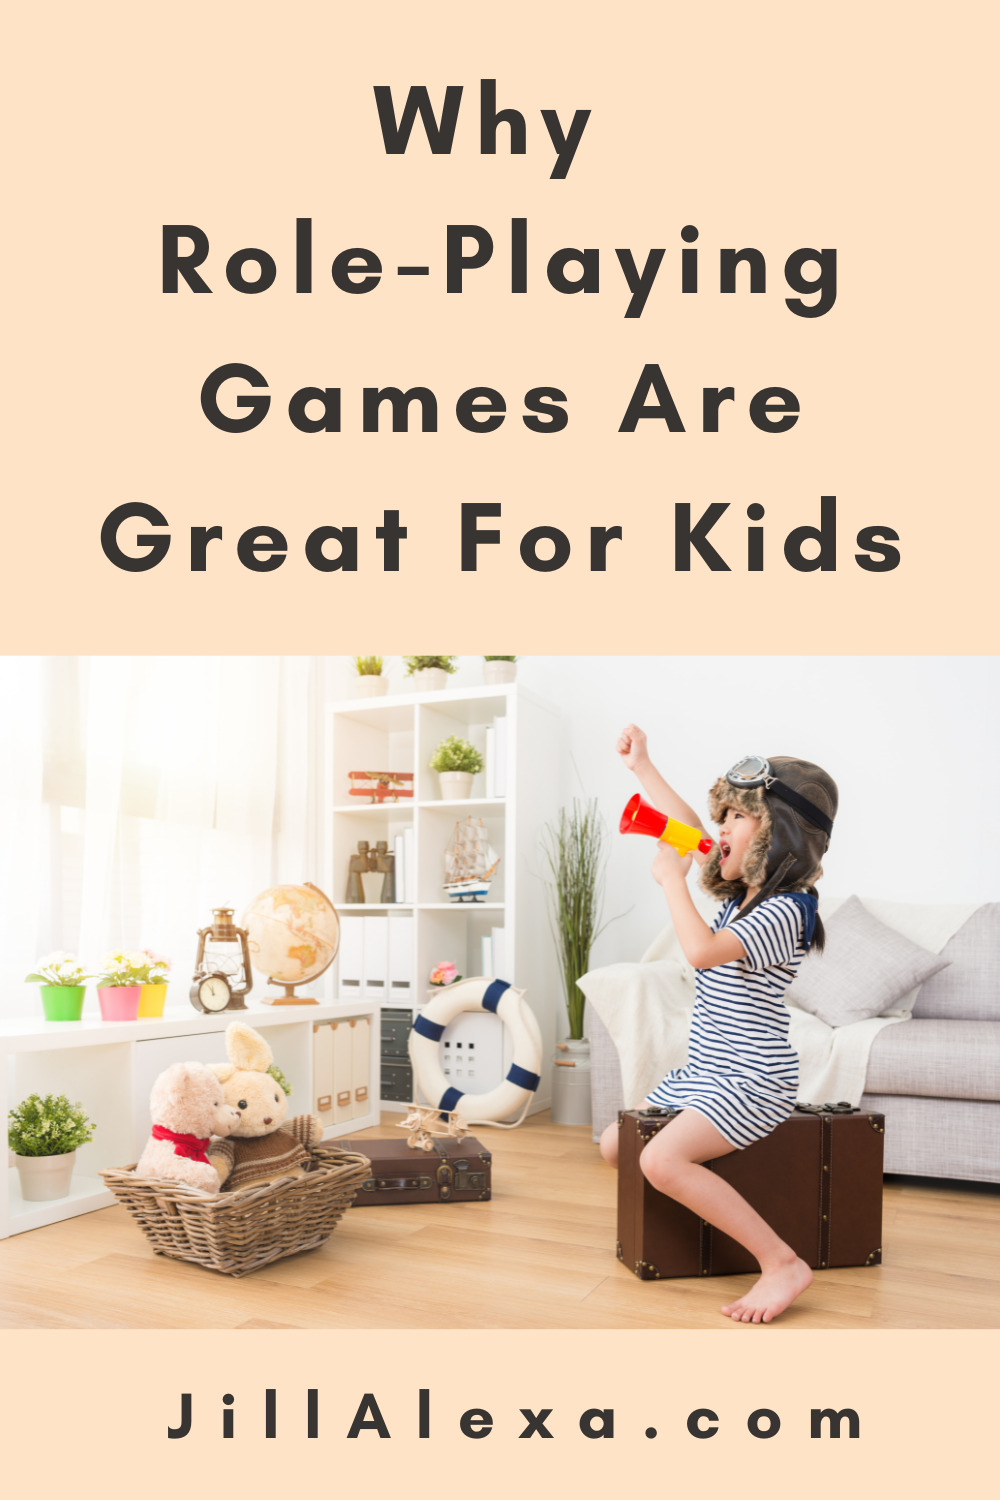 Role-playing games - or RPGs - are wonderful for developing kids. They have some unique properties that make them an ideal choice to entertain and educate.